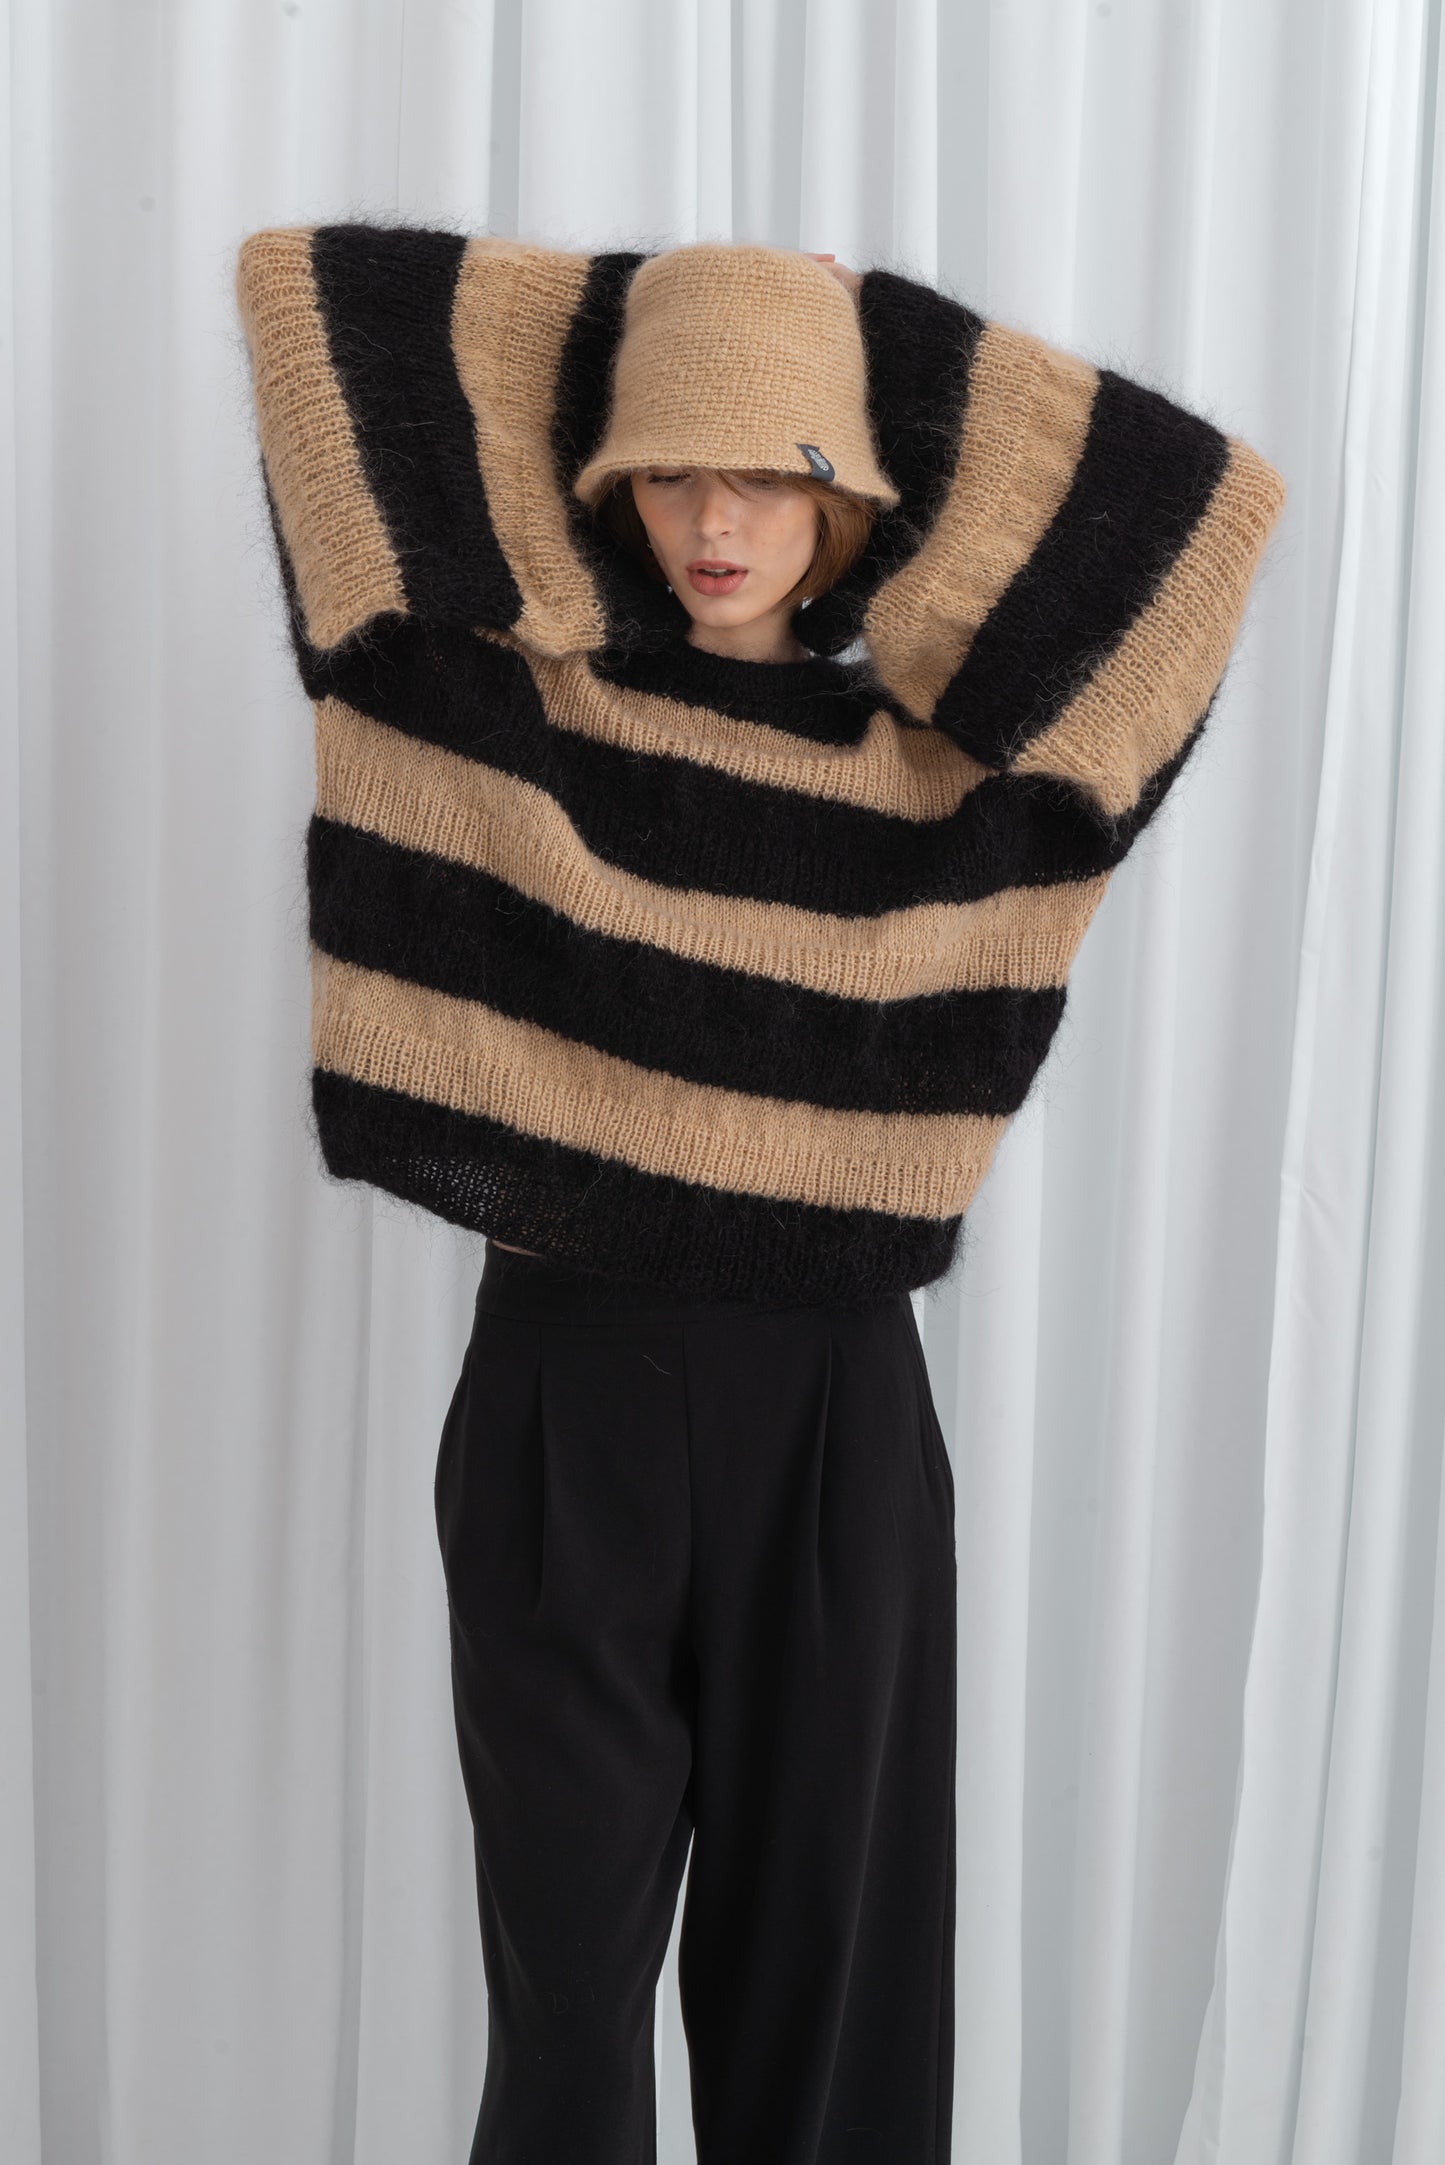 Striped Mohair Sweater